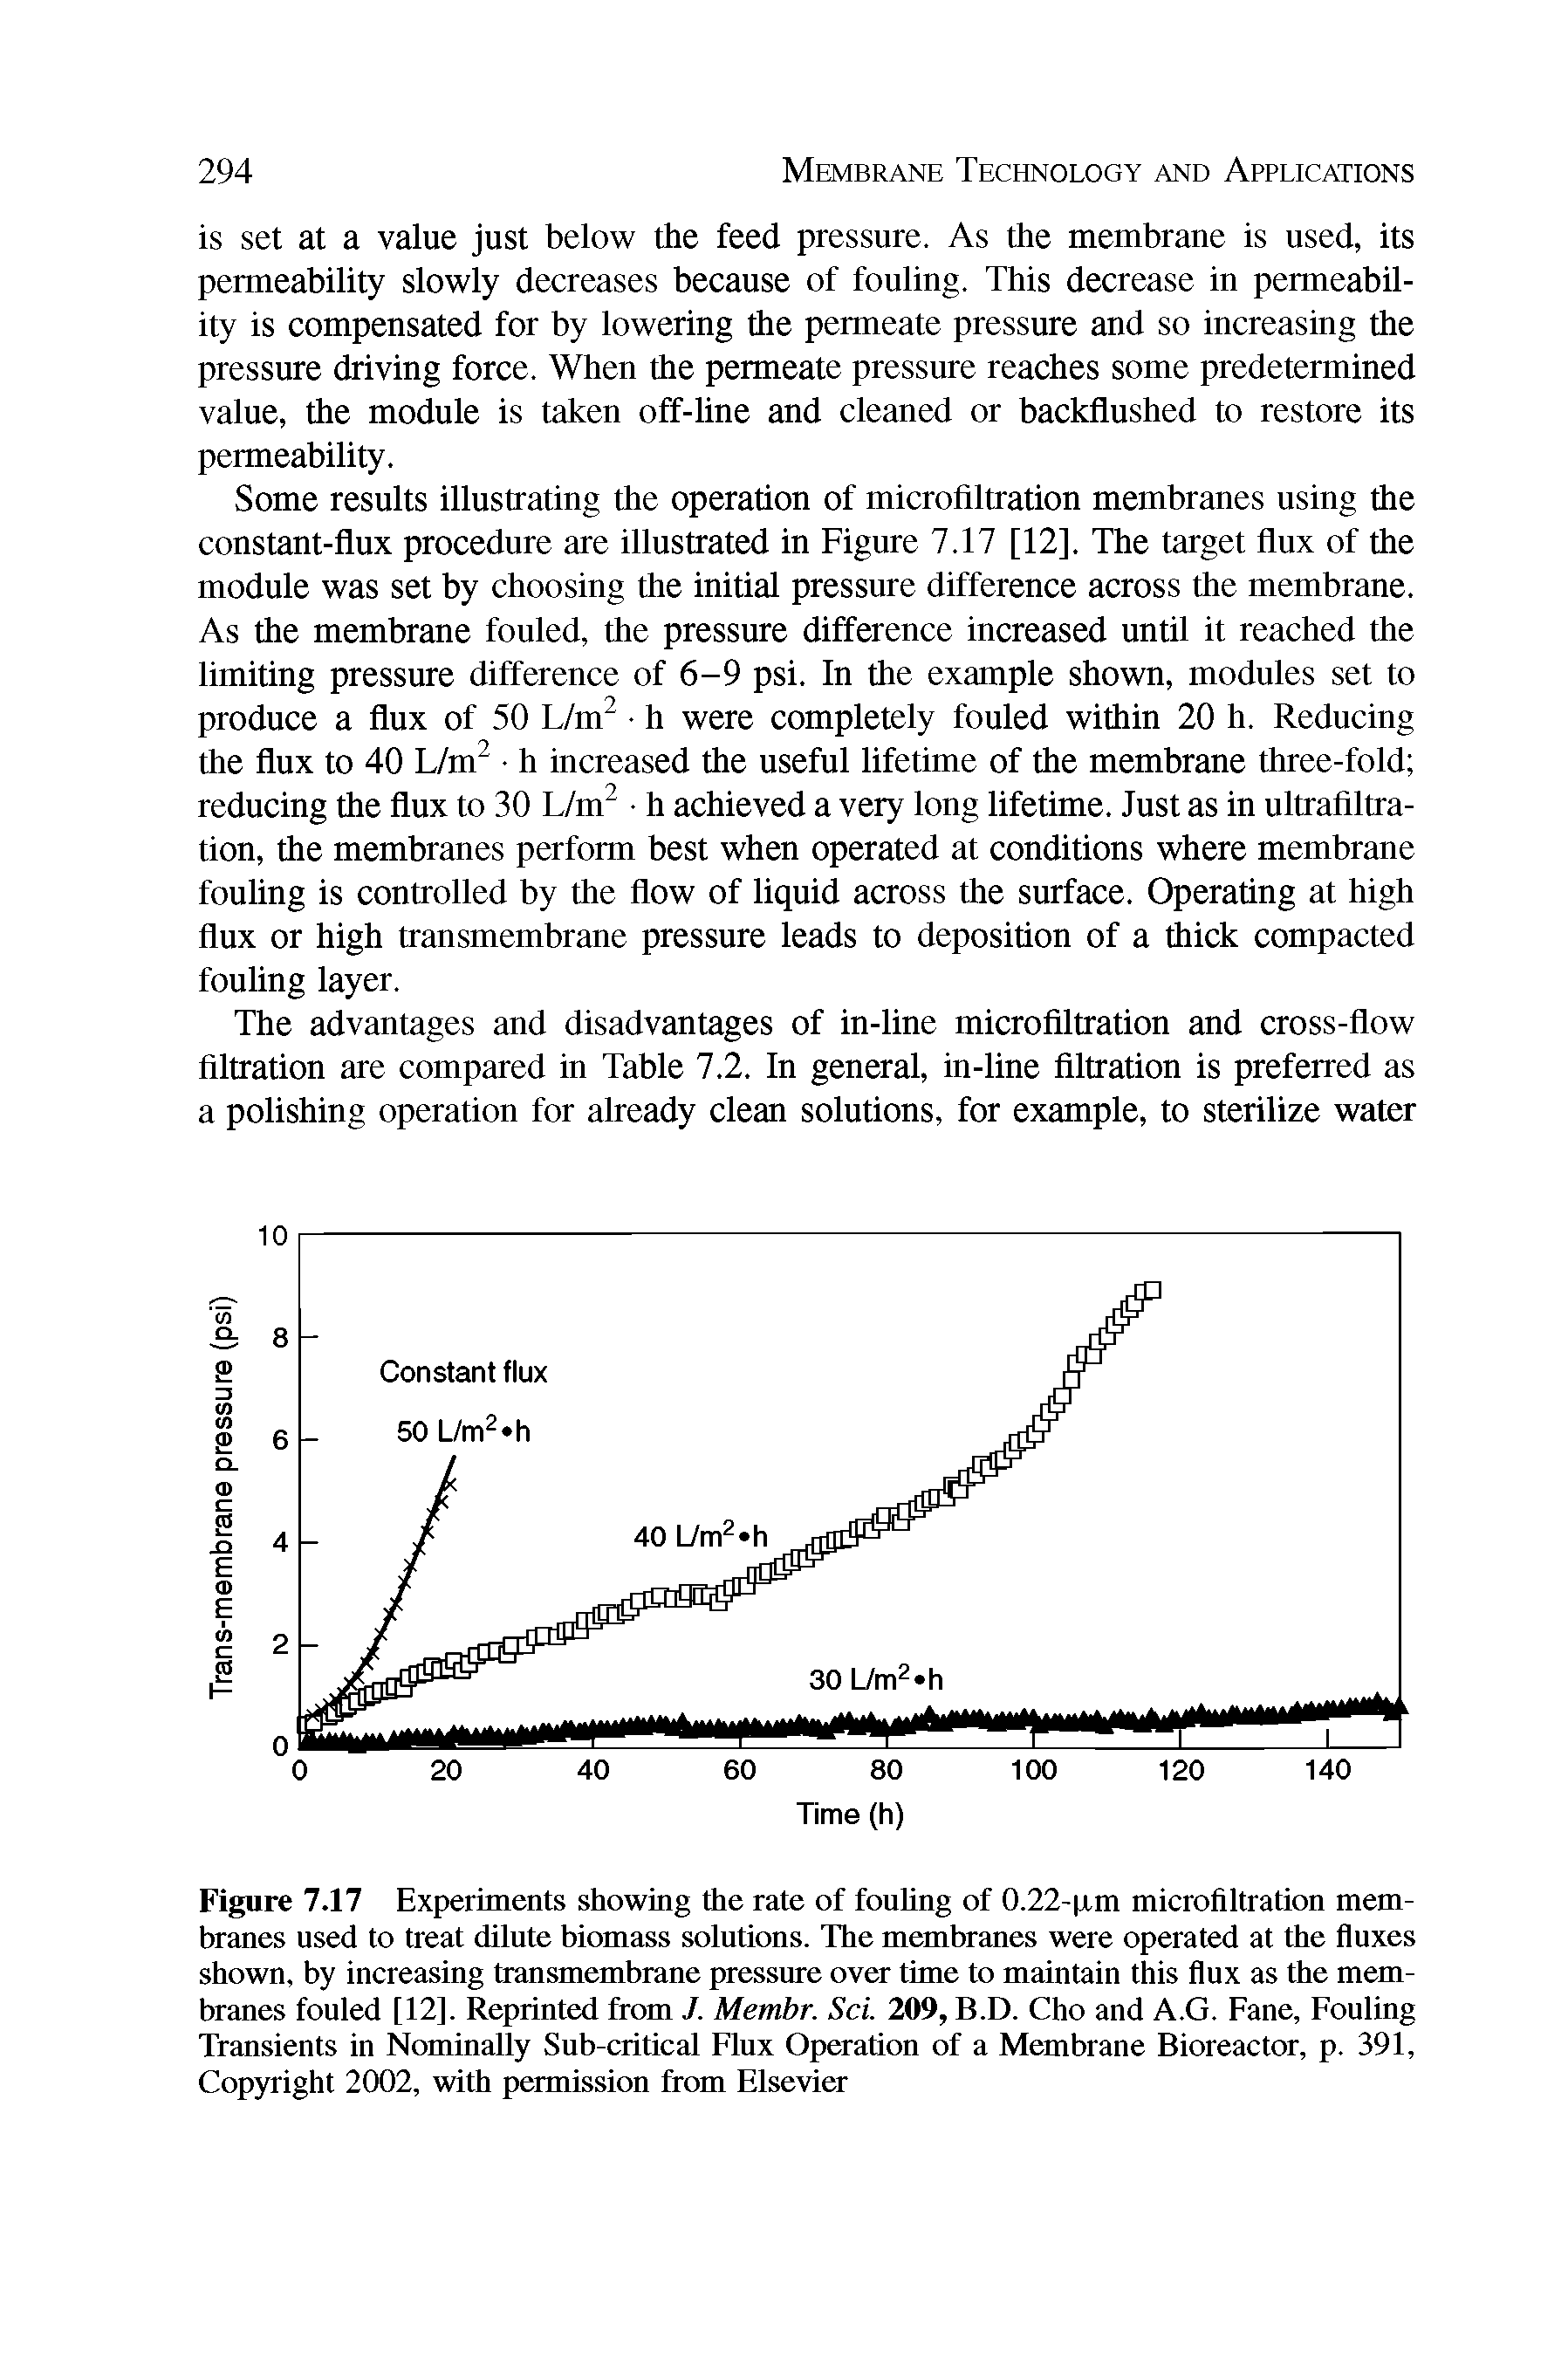 Figure 7.17 Experiments showing the rate of fouling of 0.22-p.m microfiltration membranes used to treat dilute biomass solutions. The membranes were operated at the fluxes shown, by increasing transmembrane pressure over time to maintain this flux as the membranes fouled [12]. Reprinted from J. Membr. Sci. 209, B.D. Cho and A.G. Fane, Fouling Transients in Nominally Sub-critical Flux Operation of a Membrane Bioreactor, p. 391, Copyright 2002, with permission from Elsevier...